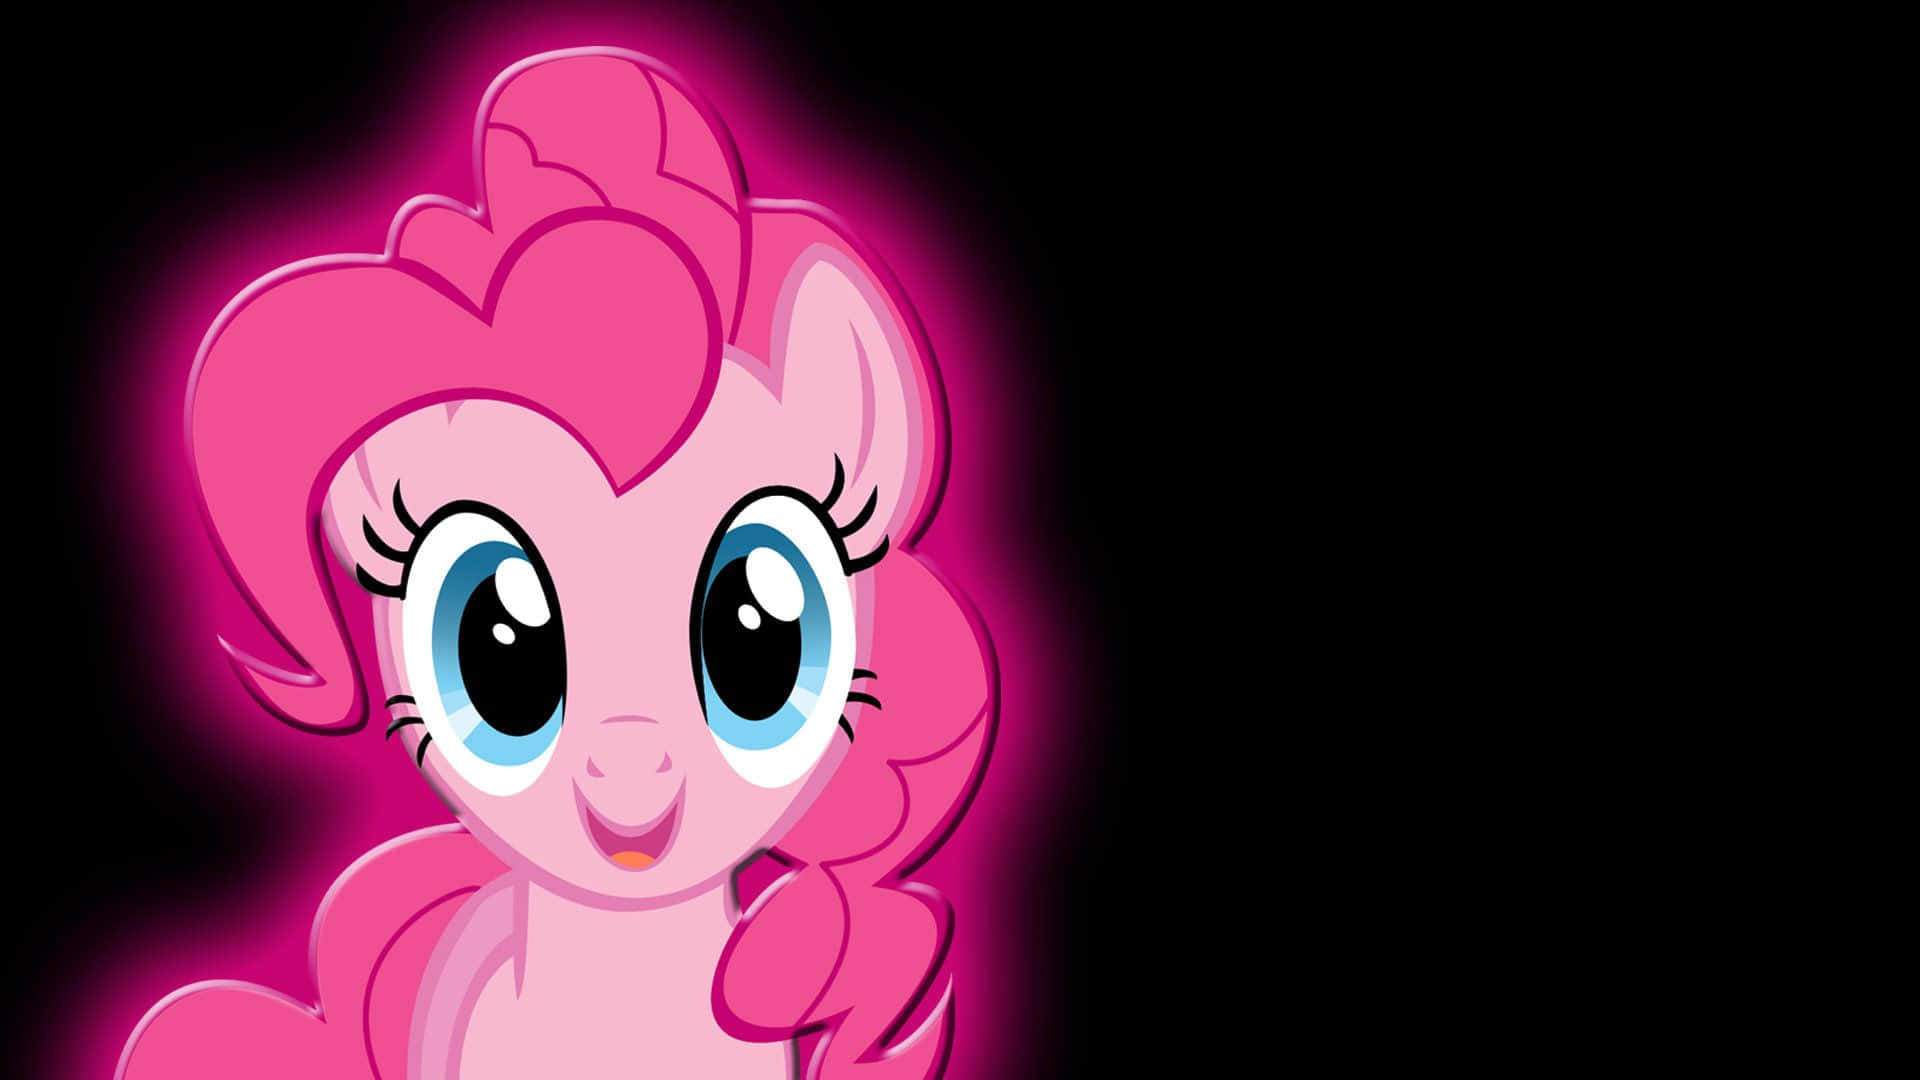 Pinkie Pie, looking full of cheer and happiness!